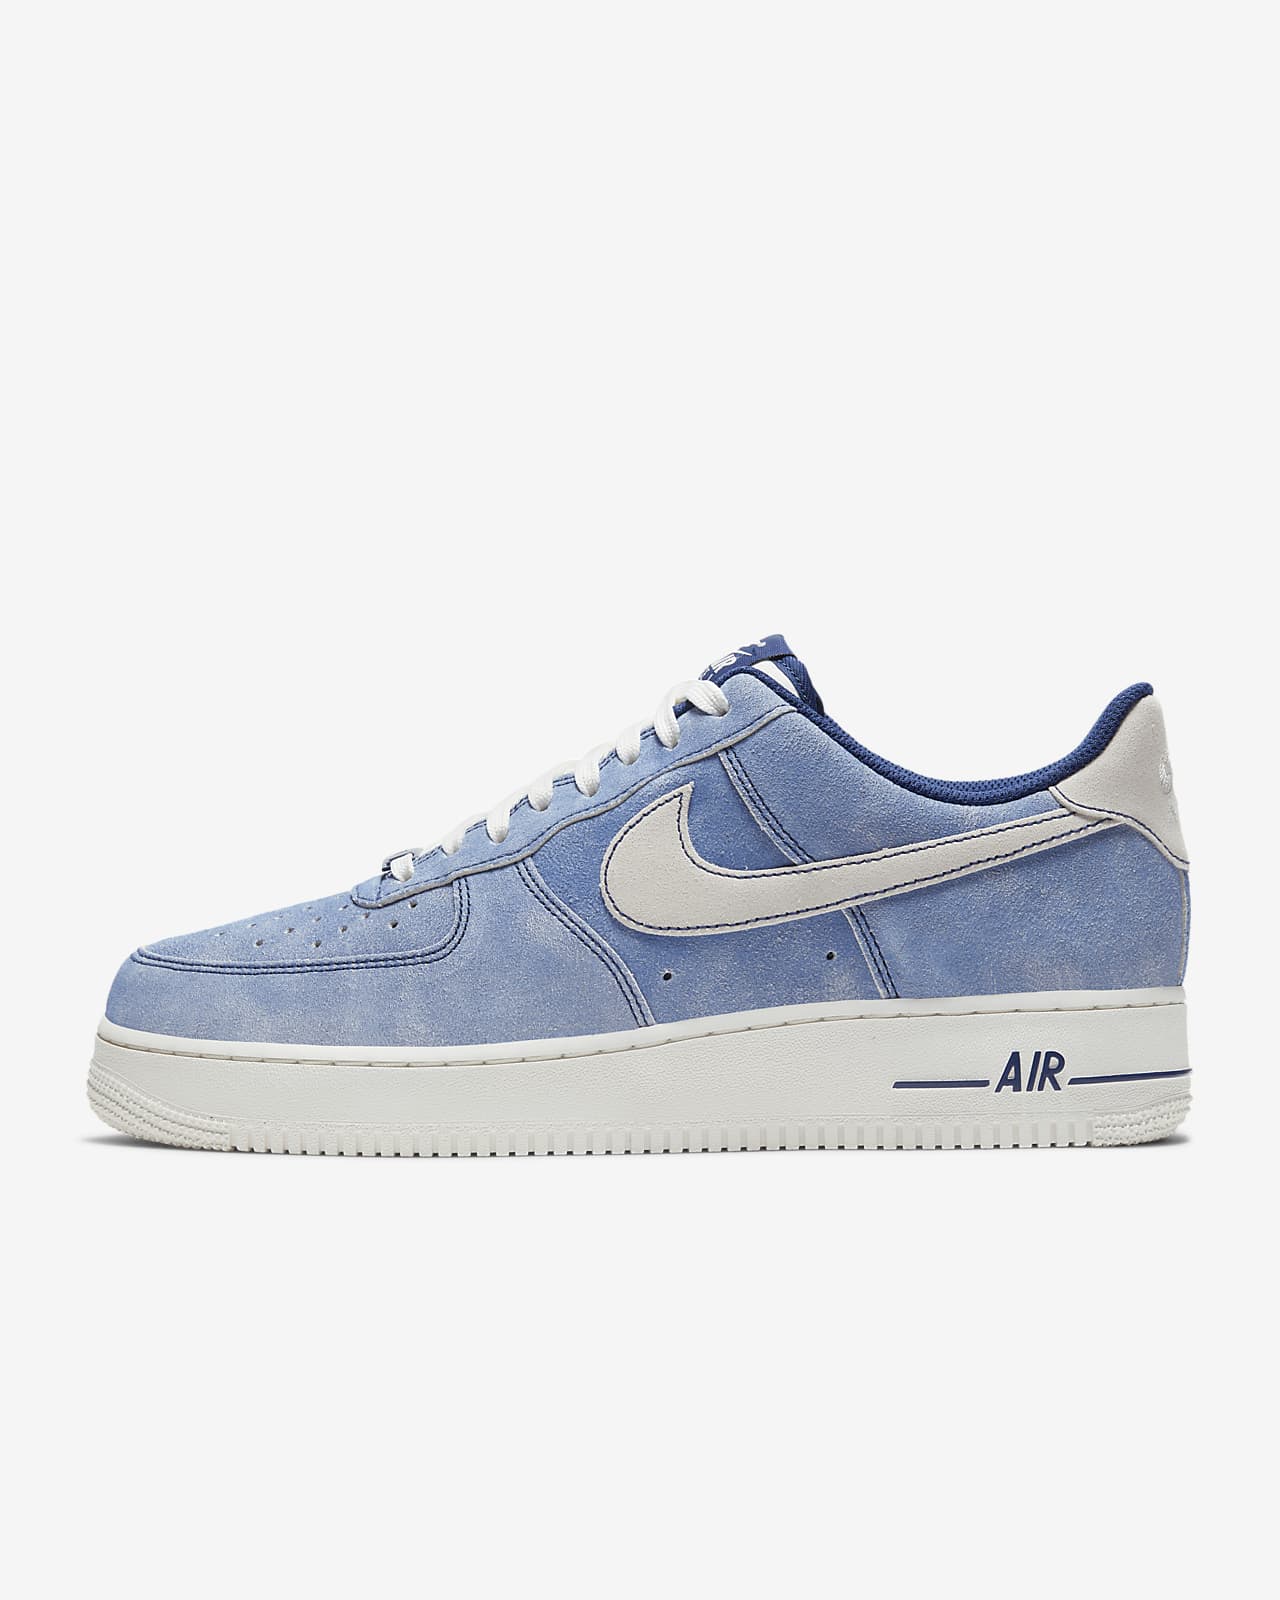 nike air force 1 size 13 mens